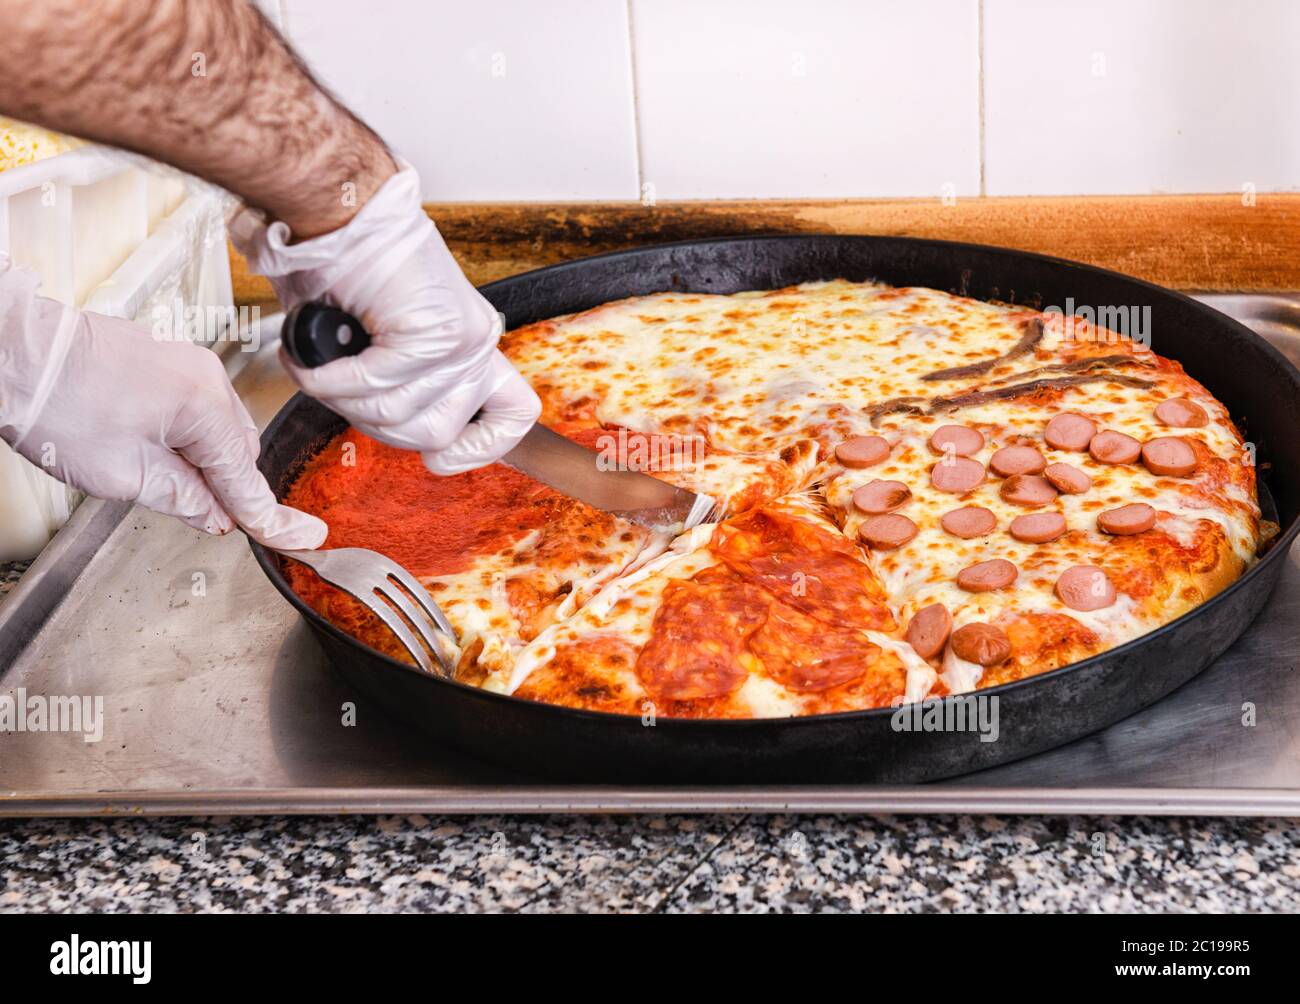 Chef Slicing An Italian Pizza With Four Assorted Toppings Using A Knife And Fork In A Pizzeria Kitchen In A Close Up On His Hands Stock Photo Alamy